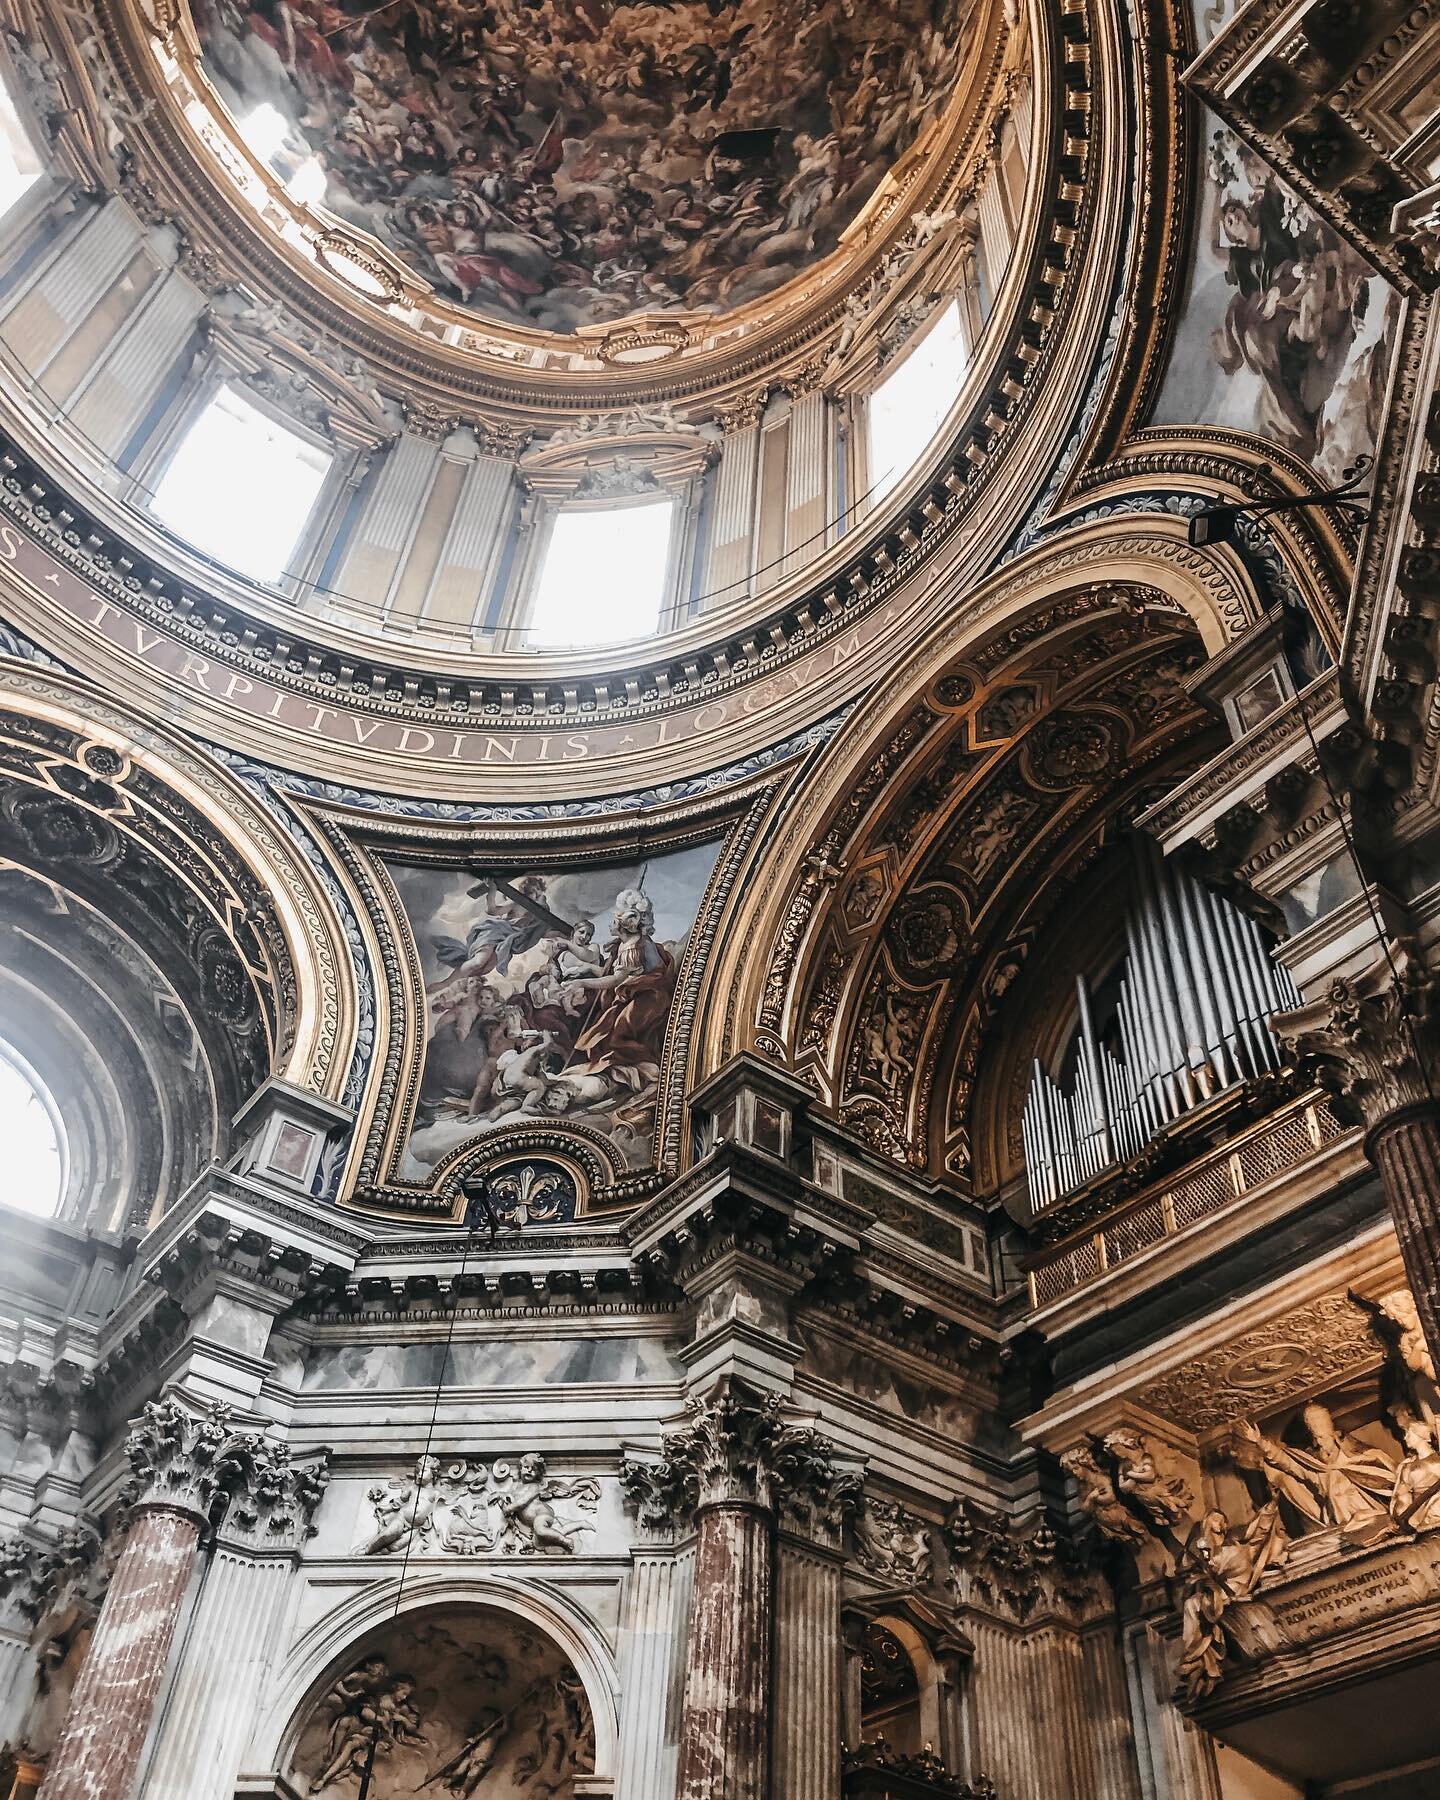 hands down my favorite church in Rome 🤩